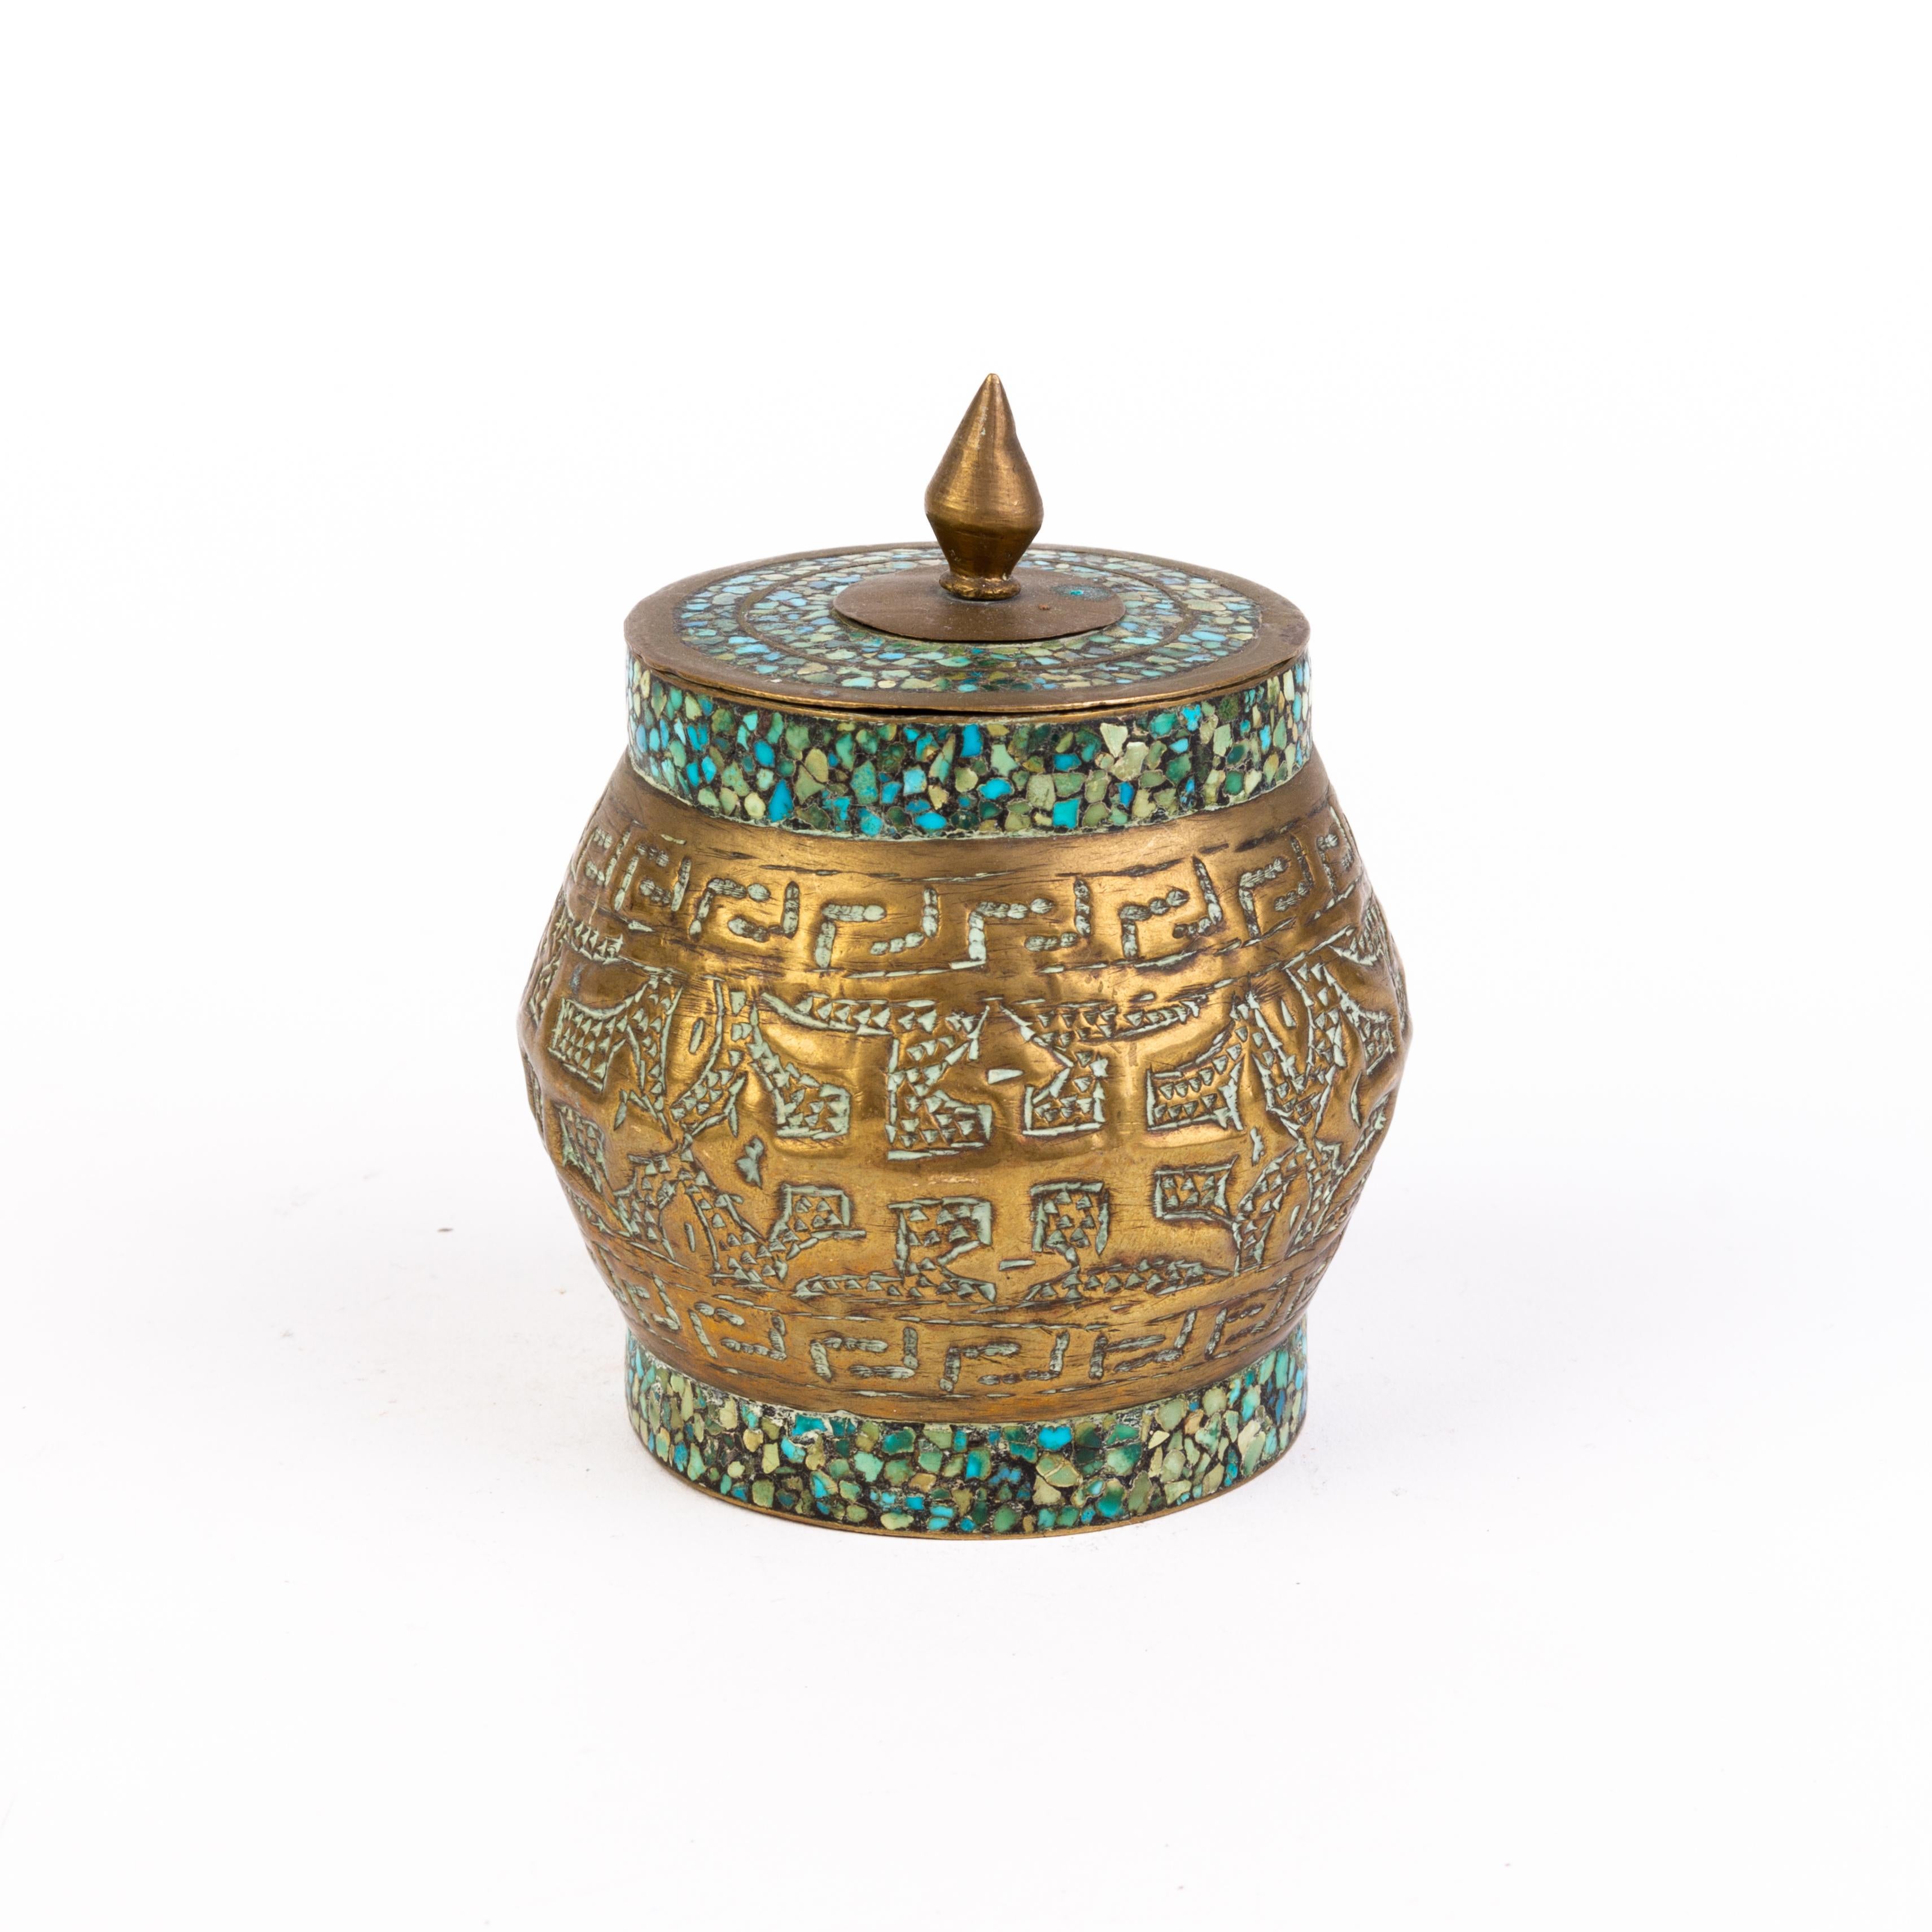 Chinese Tibetan Inlaid Turquoise Mosaic Brass Lidded Jar 19th Century 
Good condition overall
From a private collection.
Free international shipping.